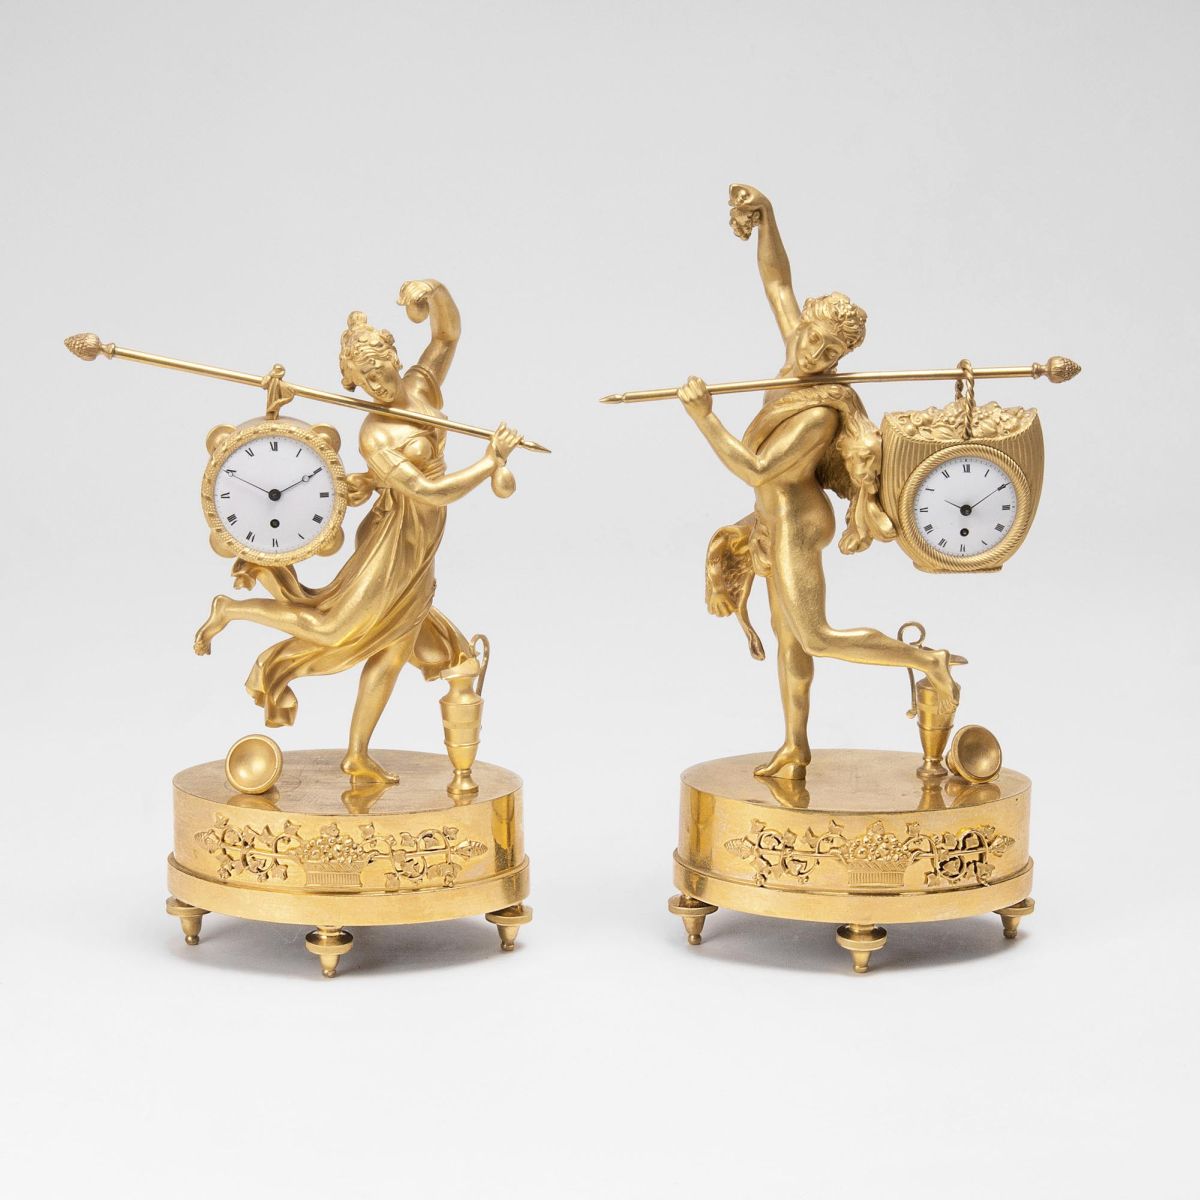 A very rare Pair 'Le Porteur' Empire Tableclocks 'Dancing Omphale' and 'Hercules'